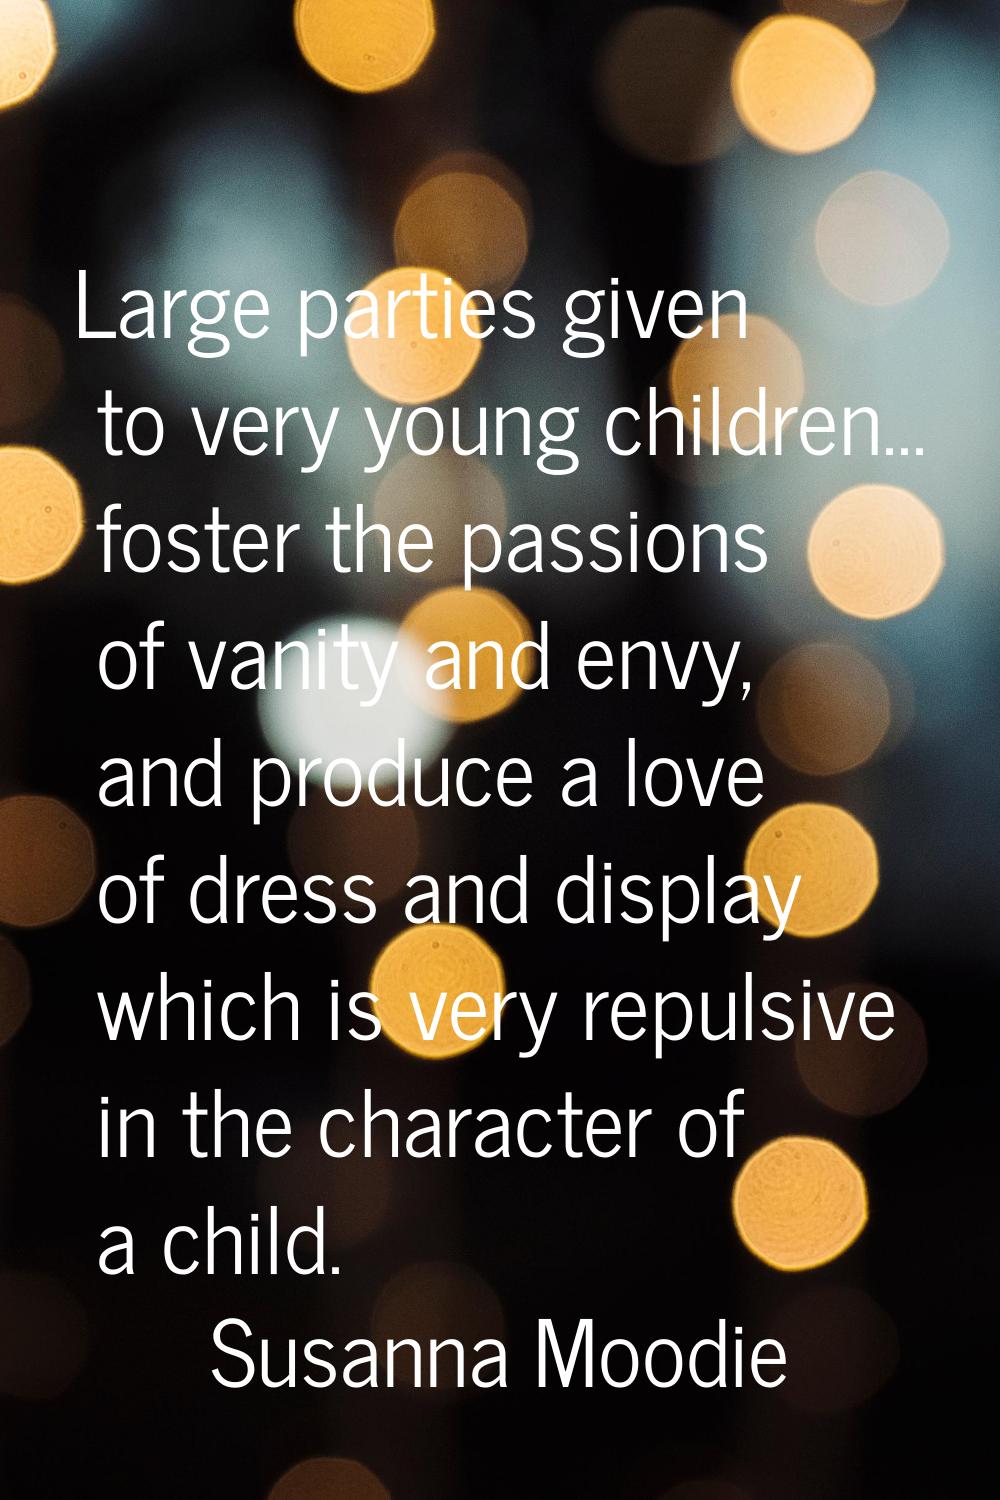 Large parties given to very young children... foster the passions of vanity and envy, and produce a